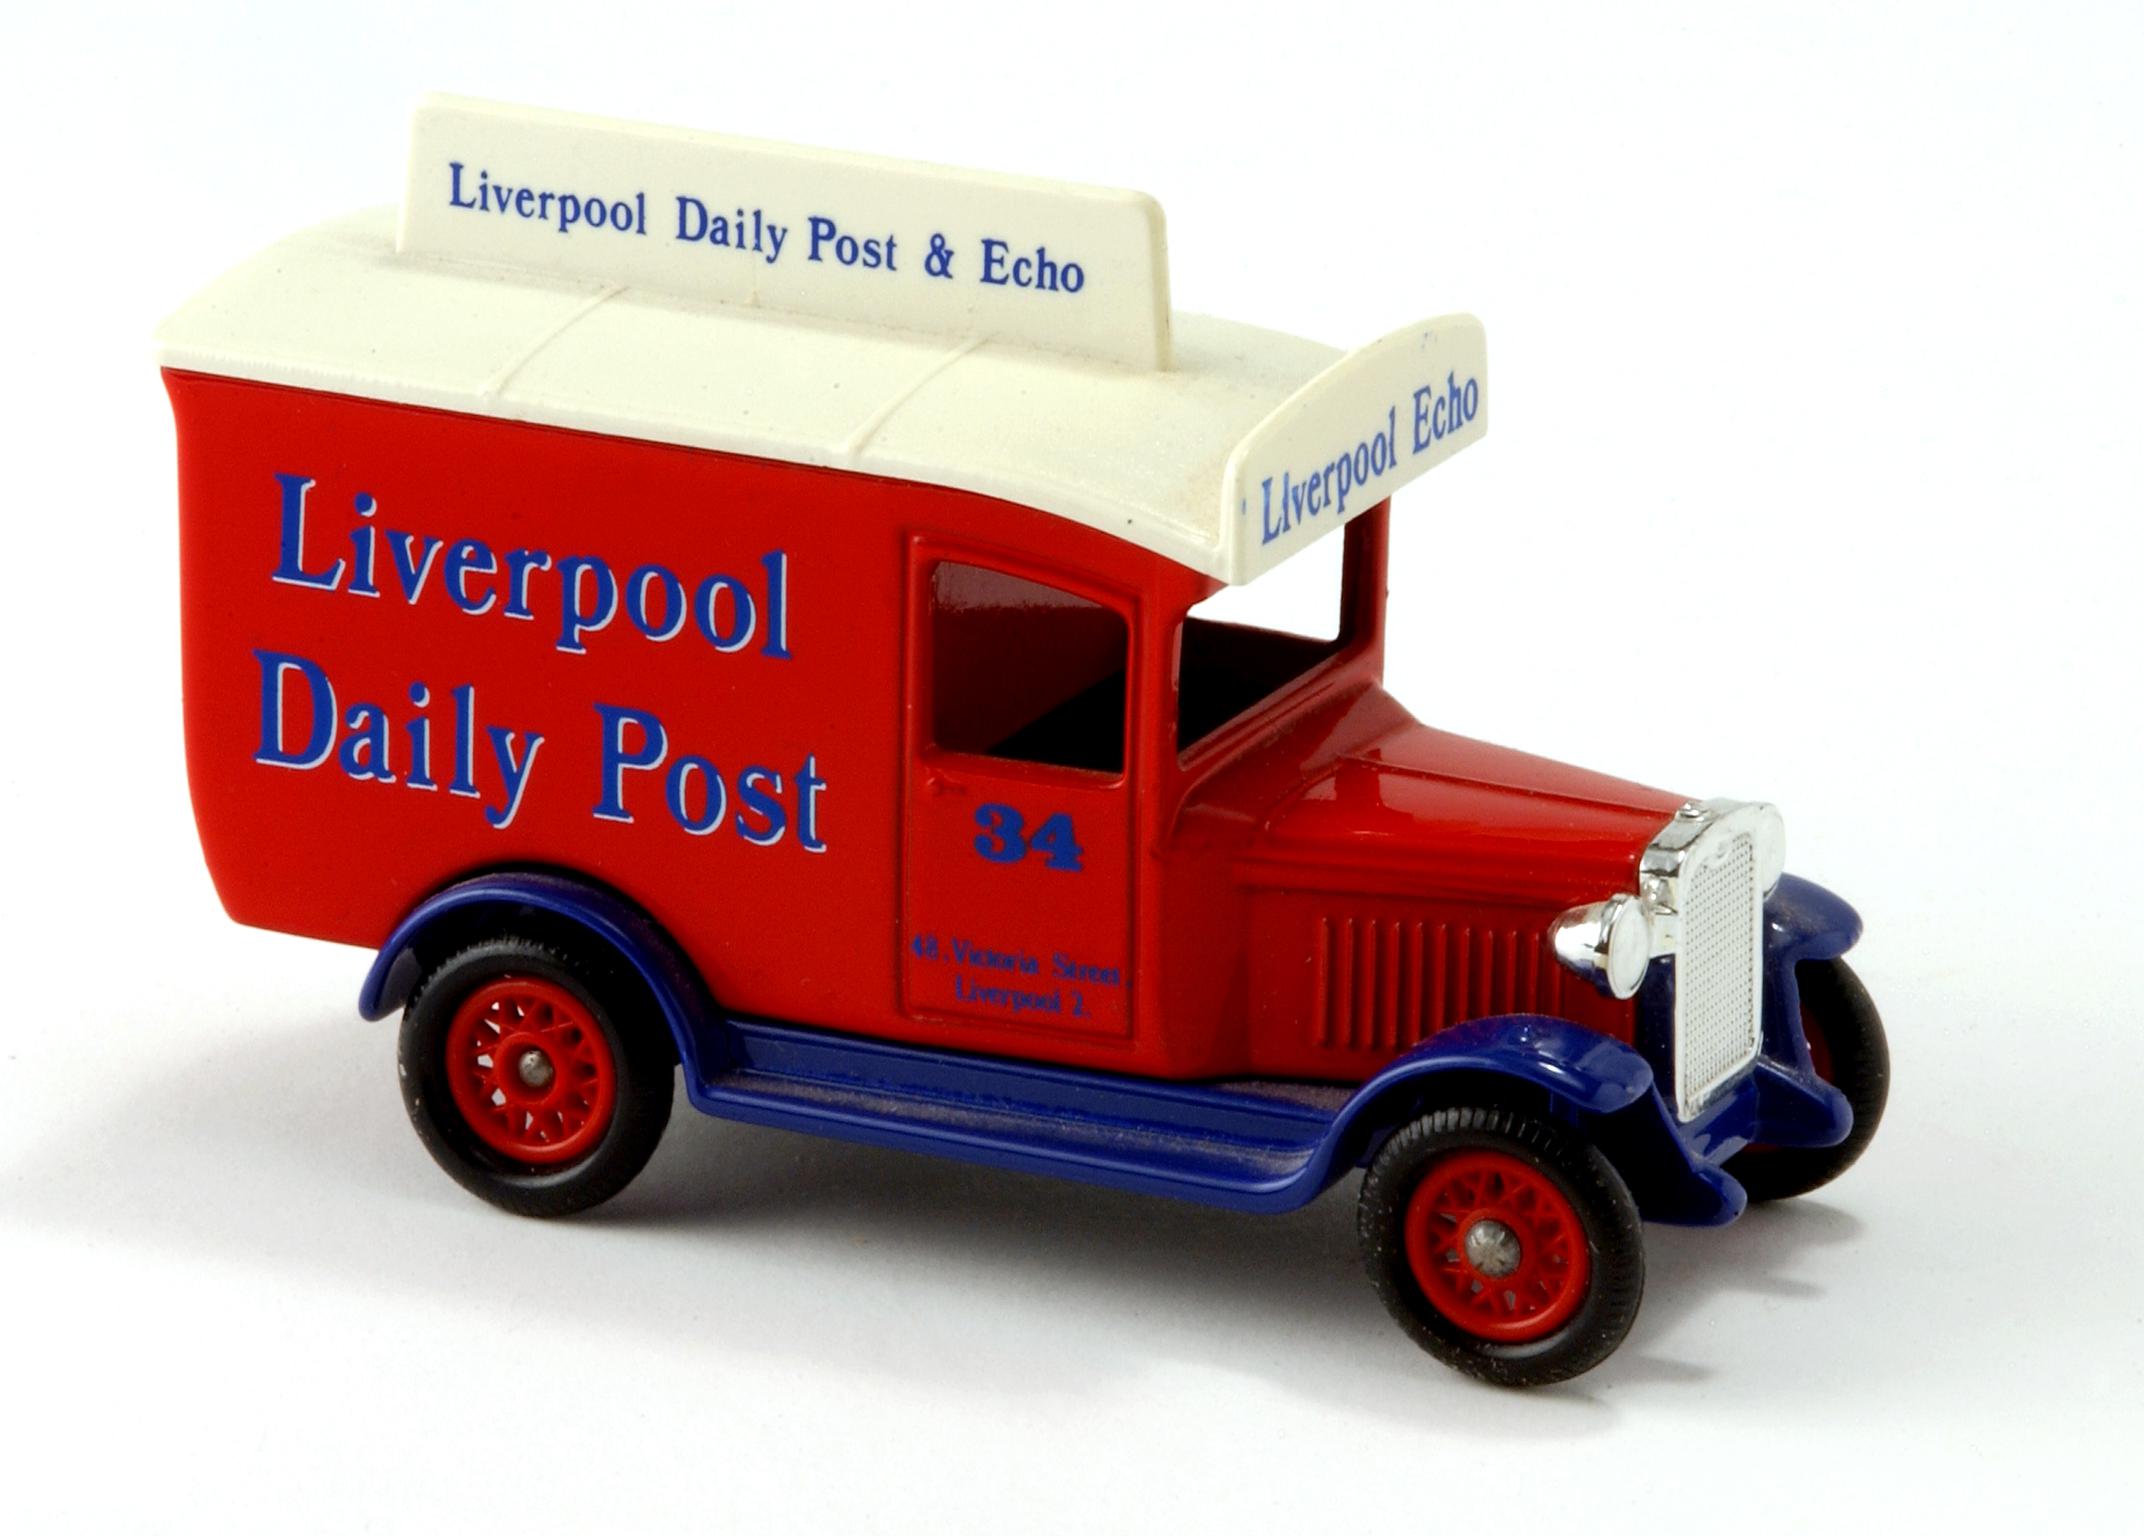 Liverpool Daily Post & Echo, Ford delivery van model